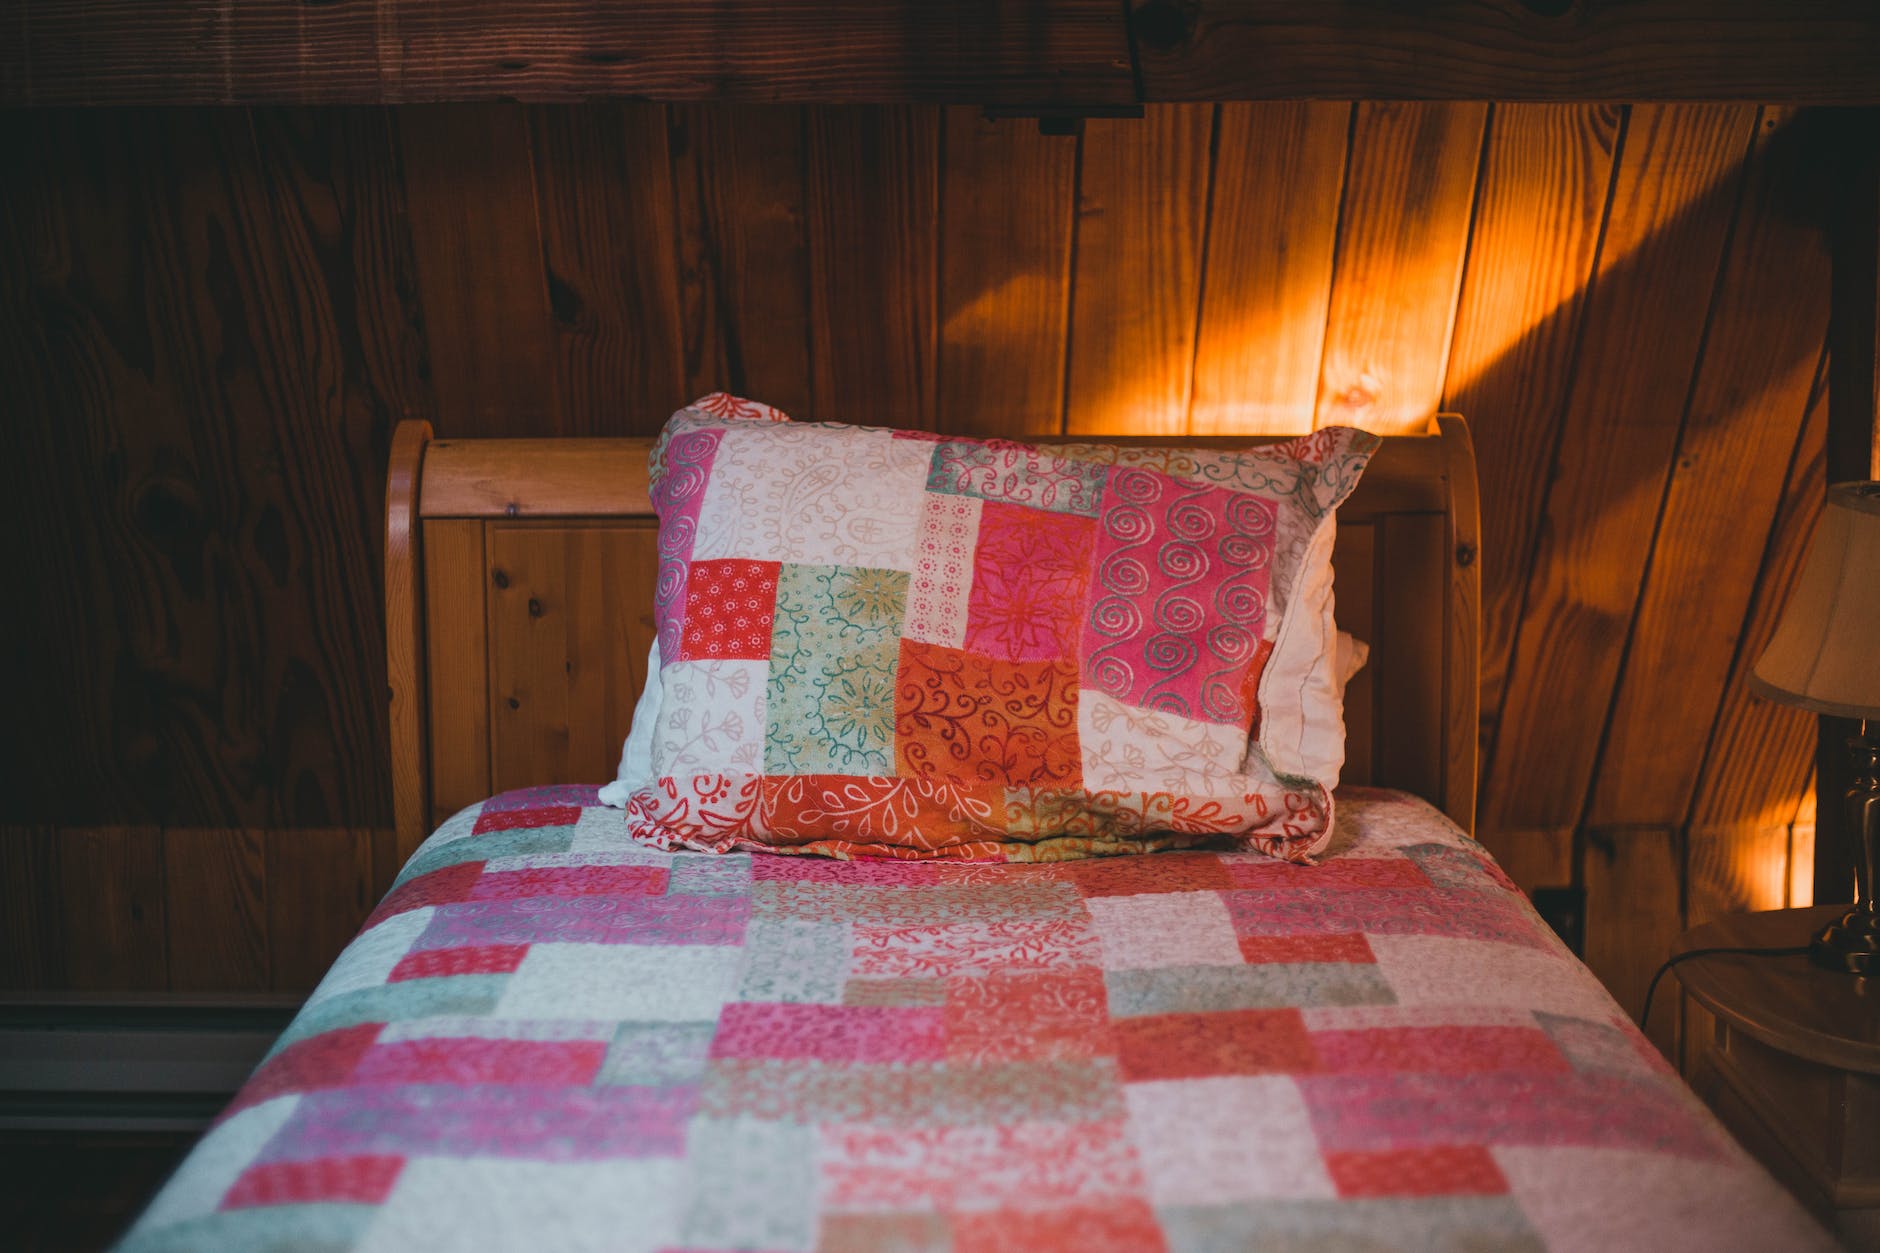 a shot of a bed in wooden interior